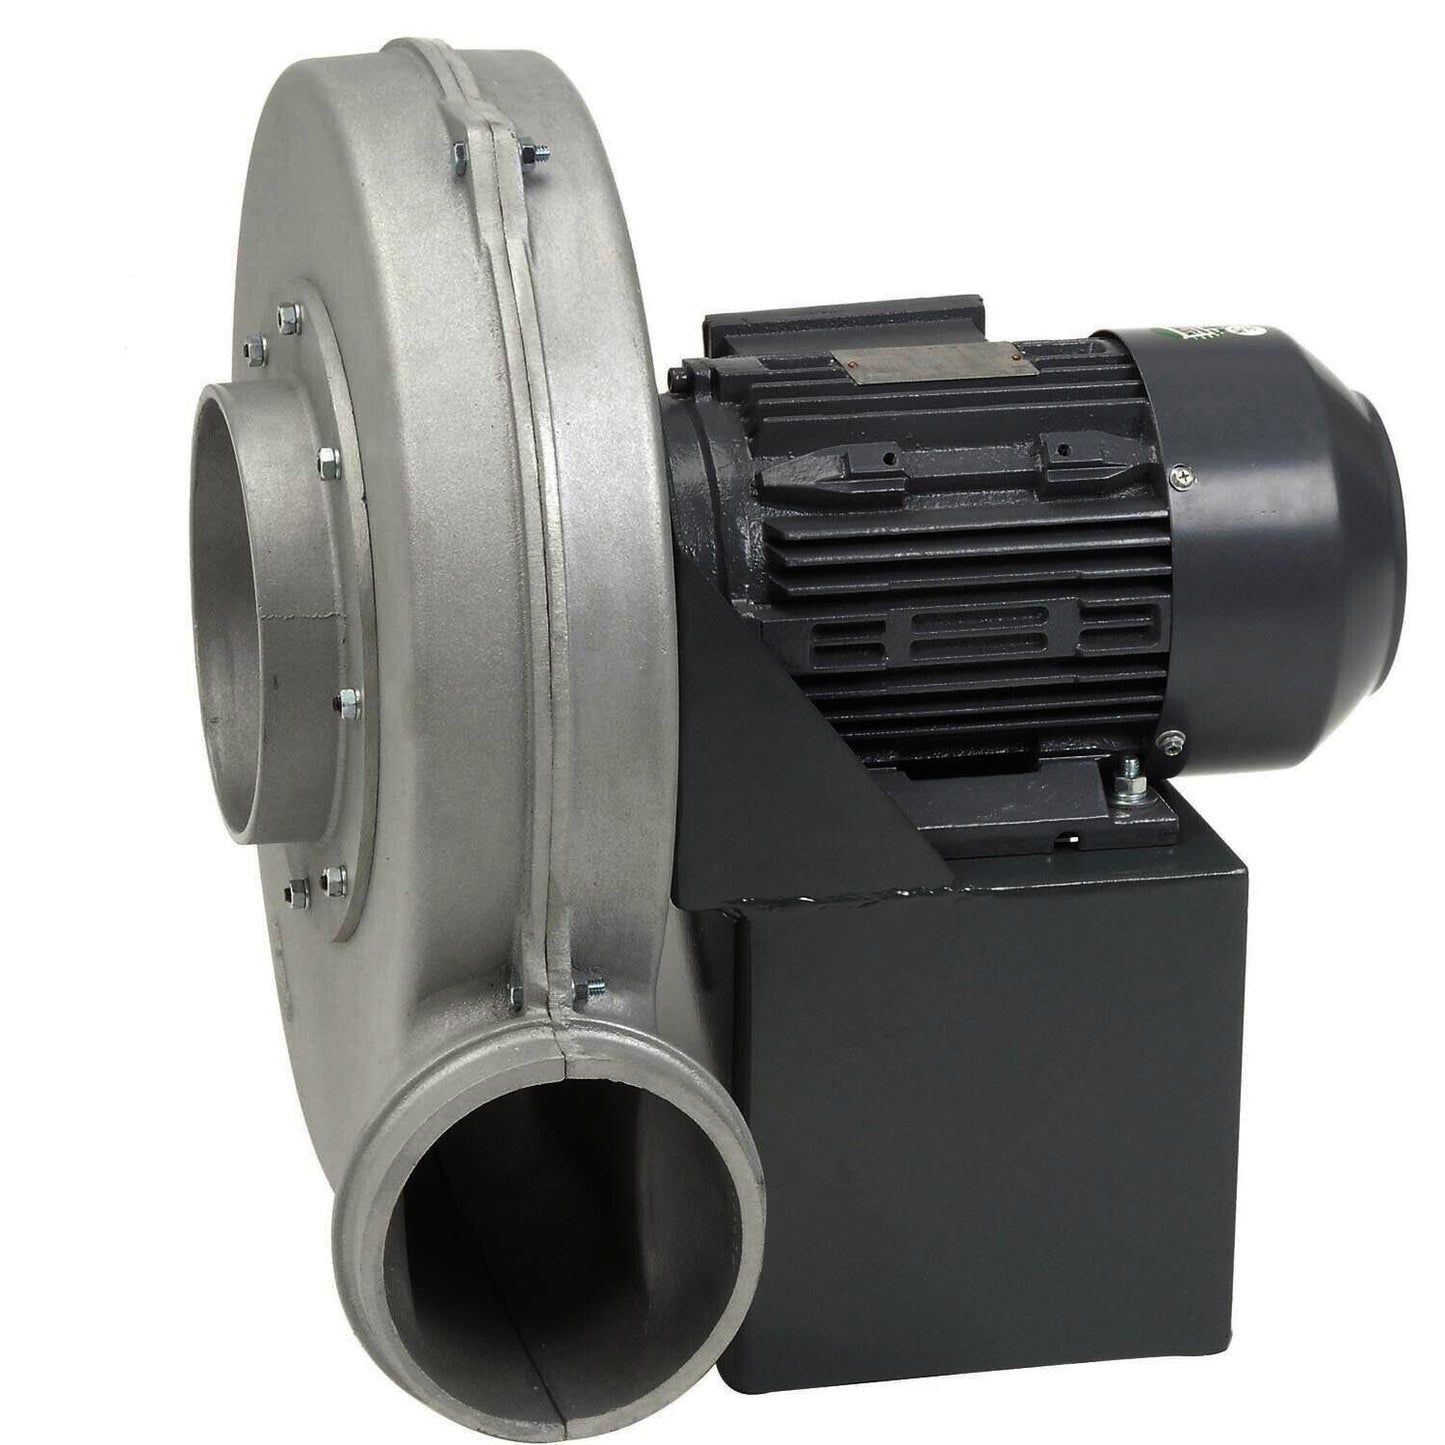 ALUMINUM BLOWER - 840 CFM - 115/230V - 1PH - 1.5 Hp - 6" In / 5" Out - TEFC - BH